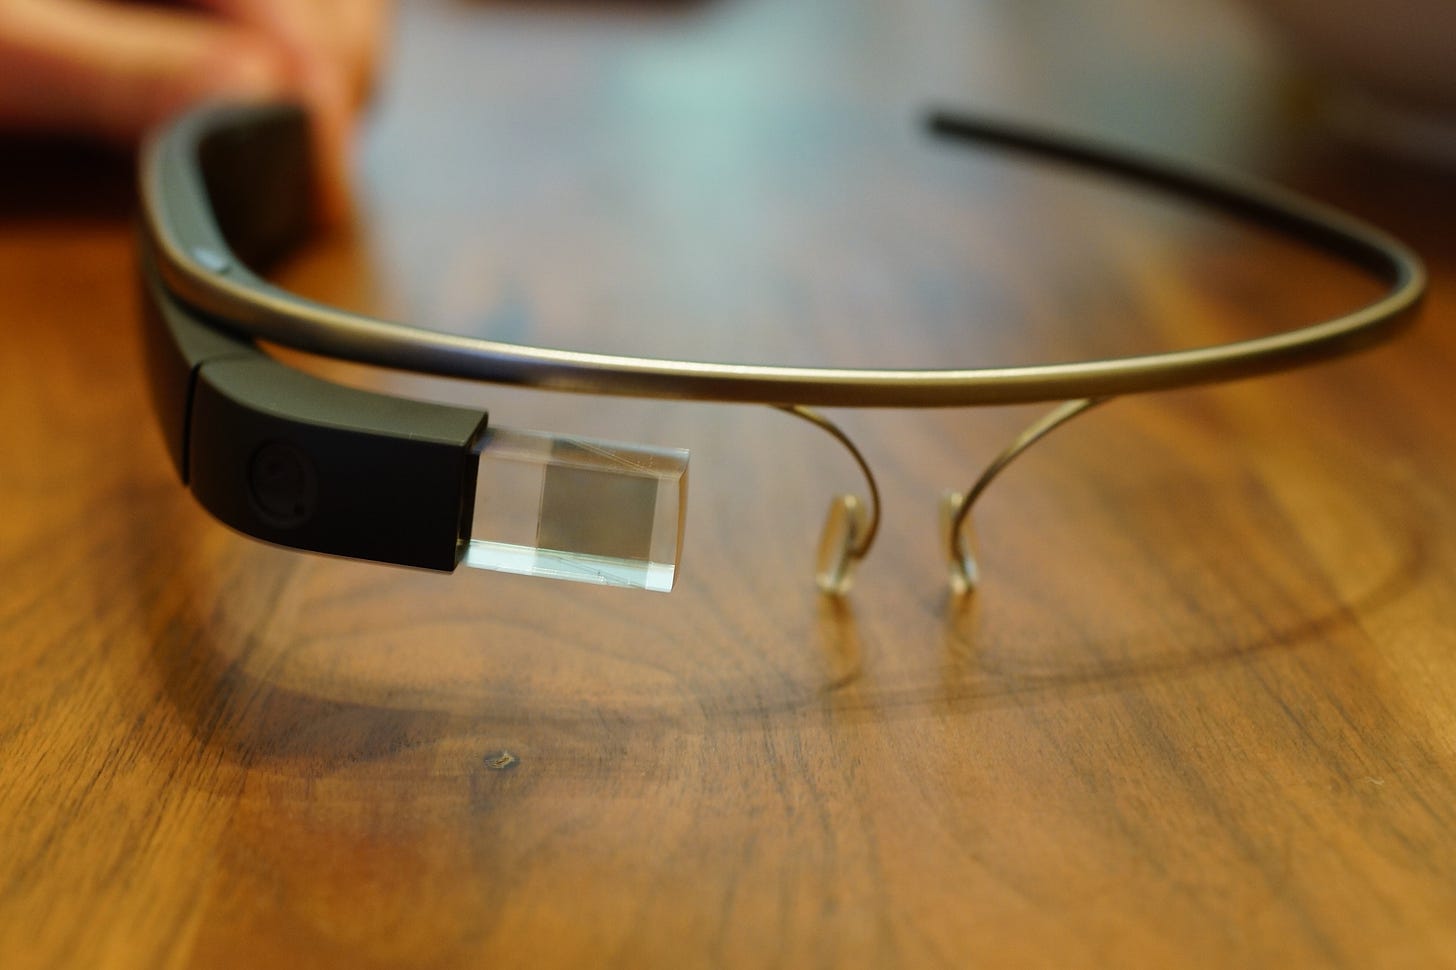 Google Glass: 10 use cases for wearable technology | ITPro